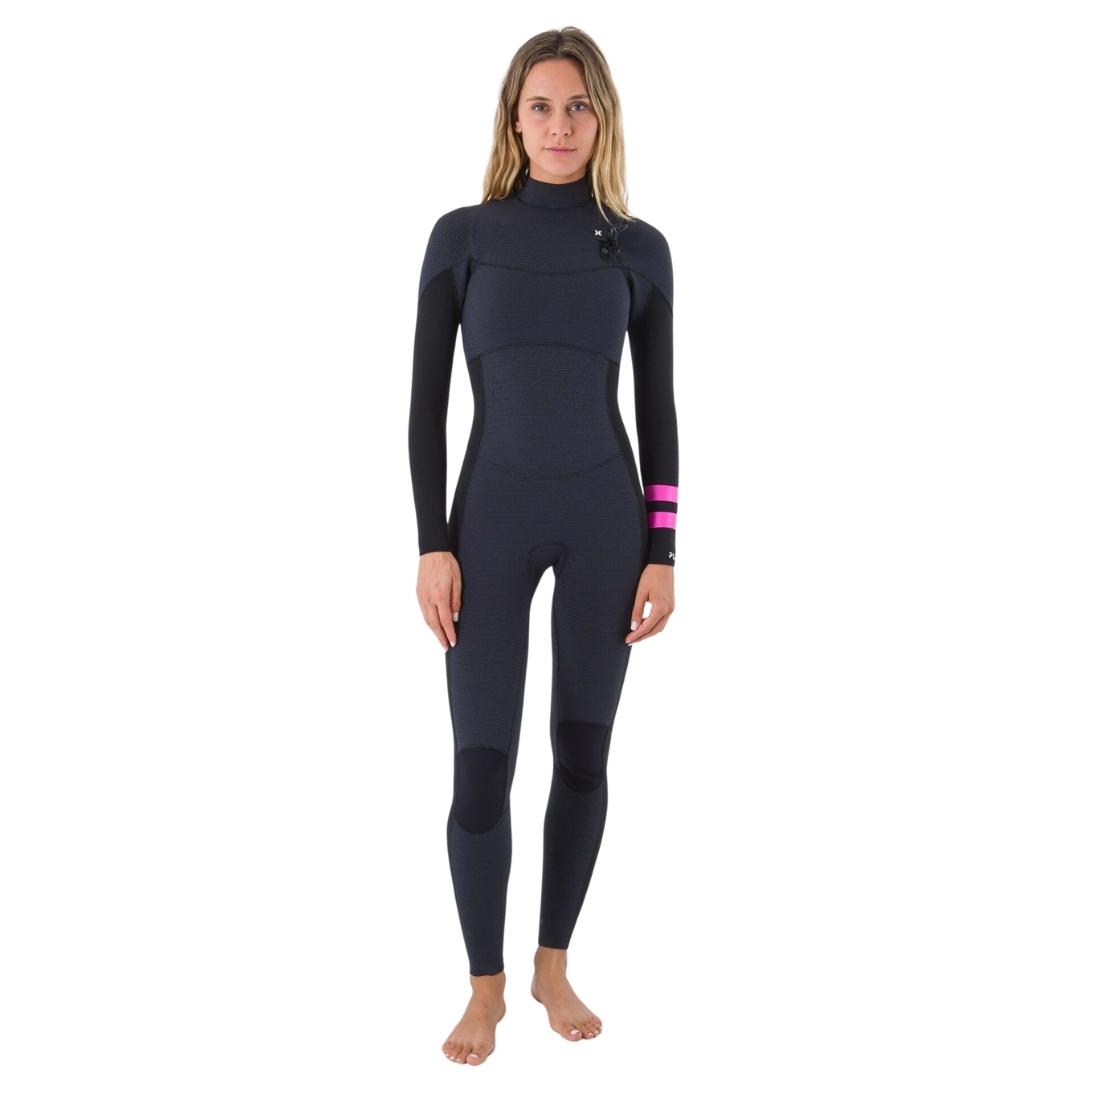 Hurley Womens Plus 4/3mm Chest Zip Full Wetsuit - Black/Graphite - Womens Full Length Wetsuit by Hurley